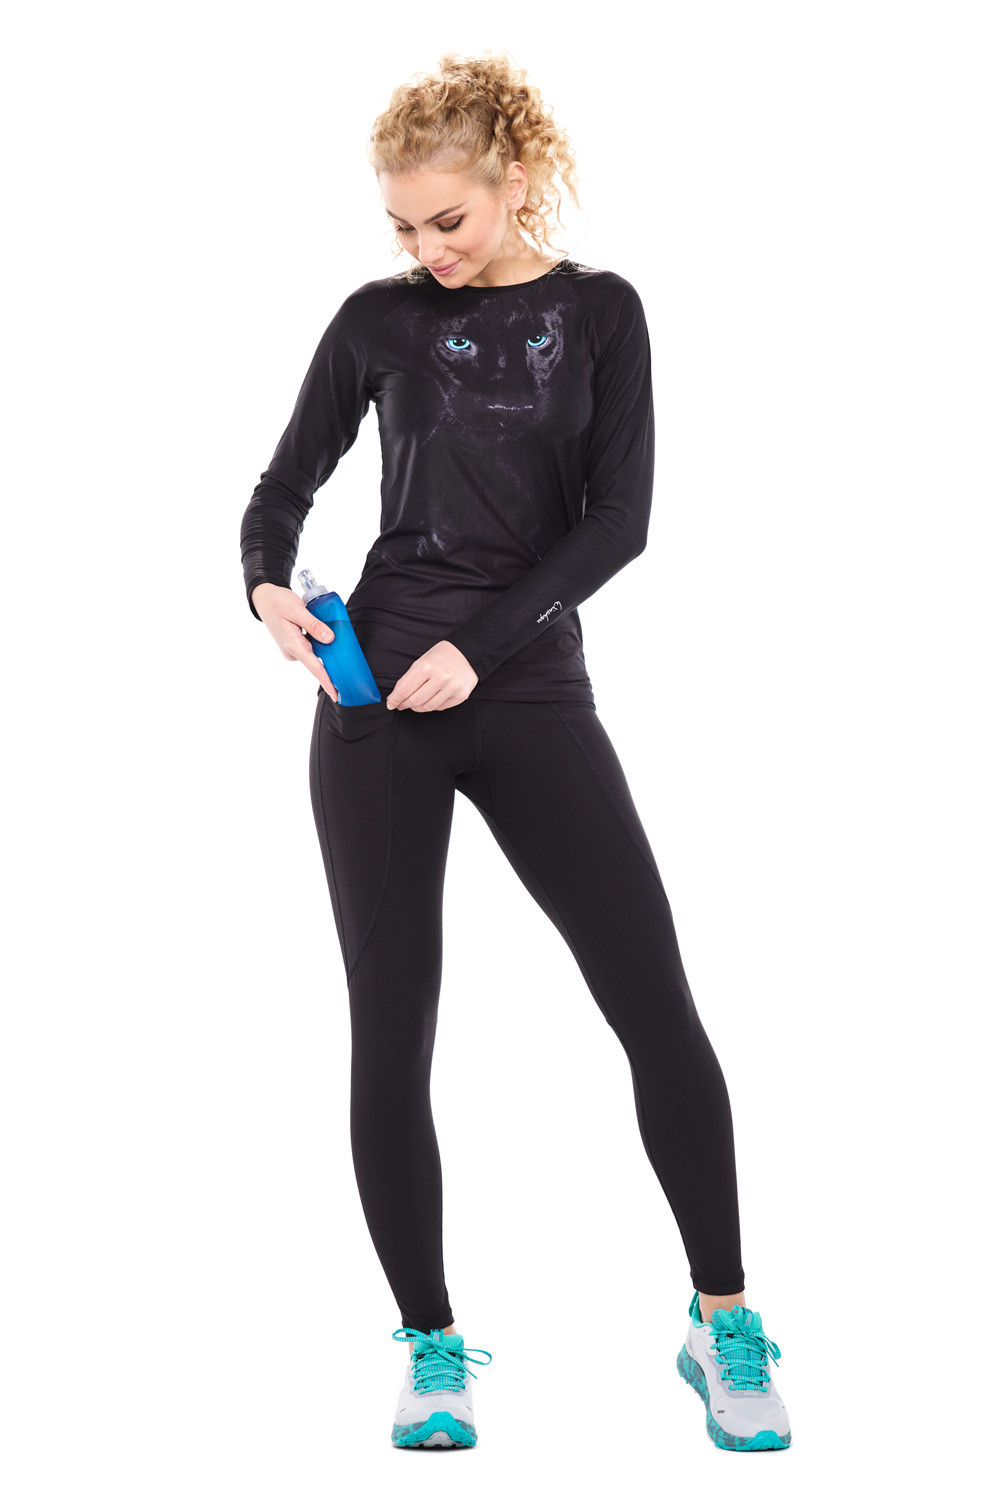 Functional Light and Soft Long Sleeve Panther, AET120LS, Top Soft Winshape Ultra Style